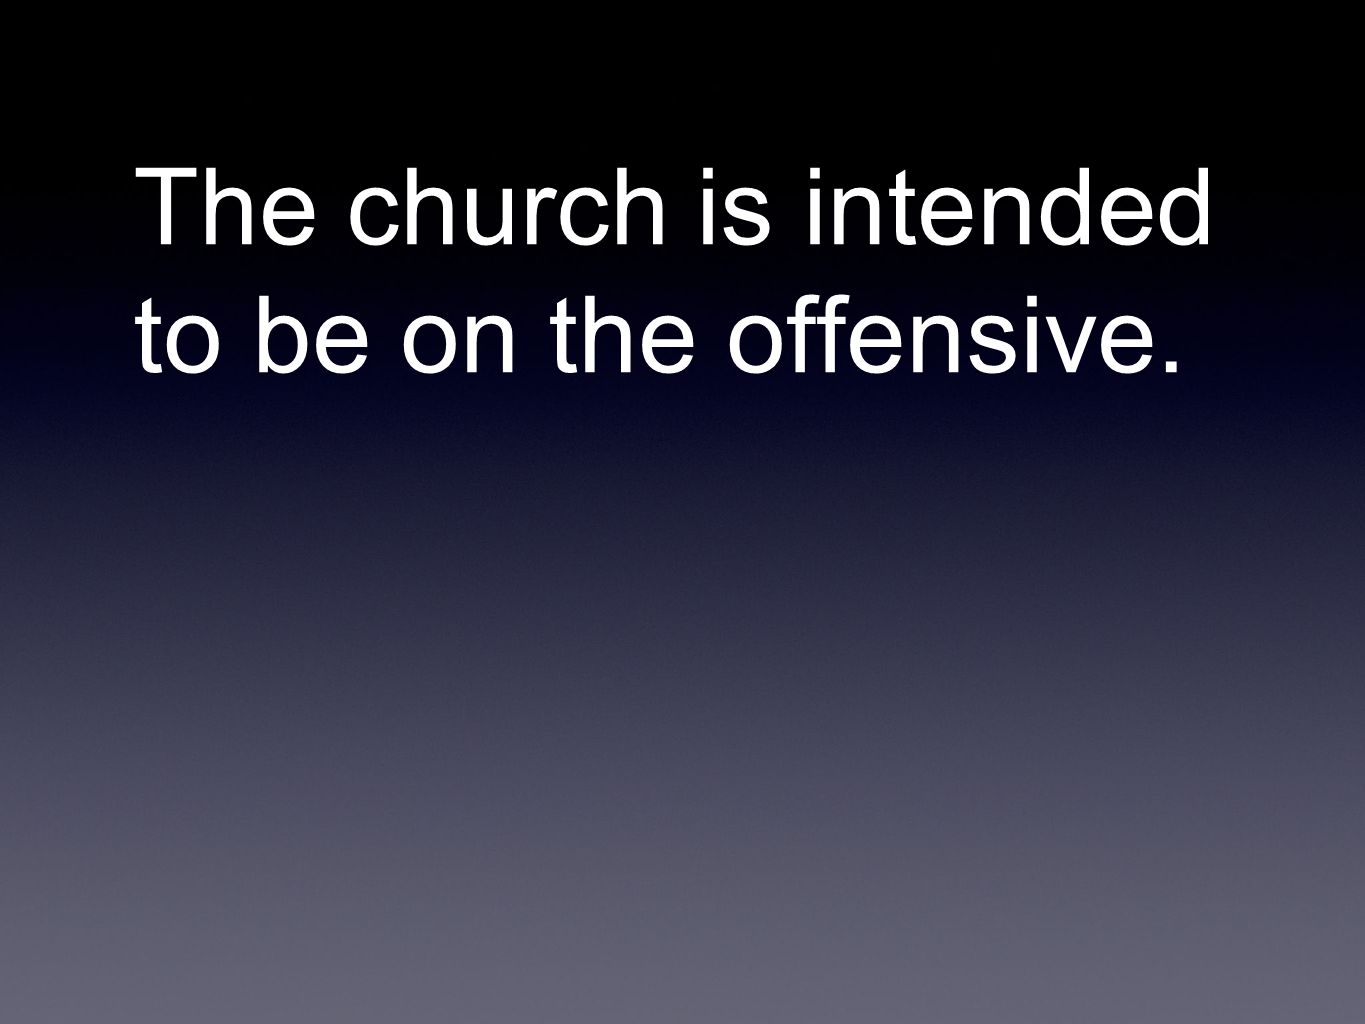 The church is intended to be on the offensive.